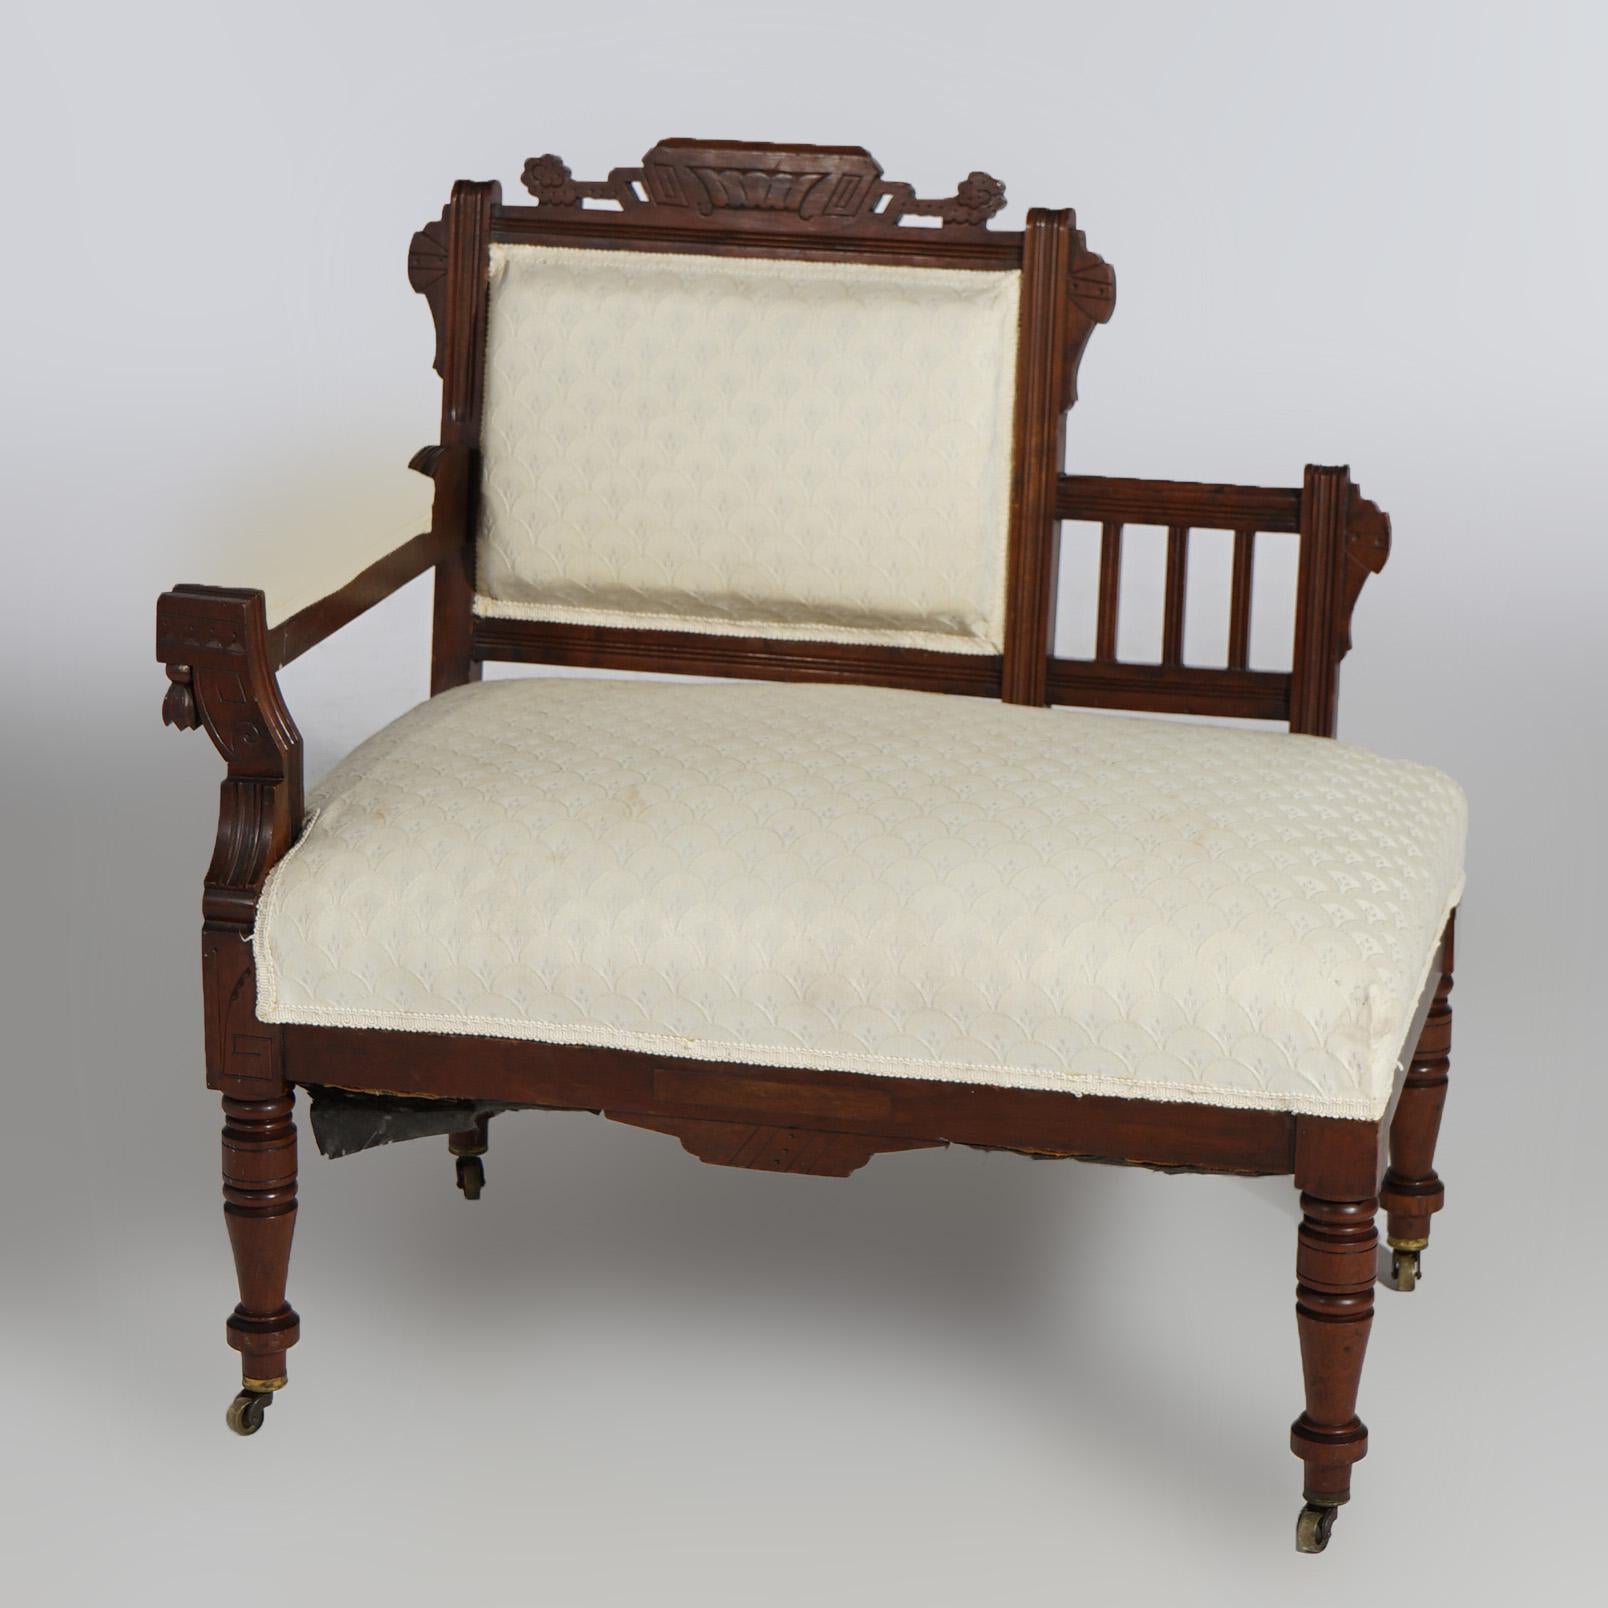 An antique Victorian Eastlake half-settee offers spindle back walnut frame with upholstered seat and back, circa 1890

Measures - 34.5